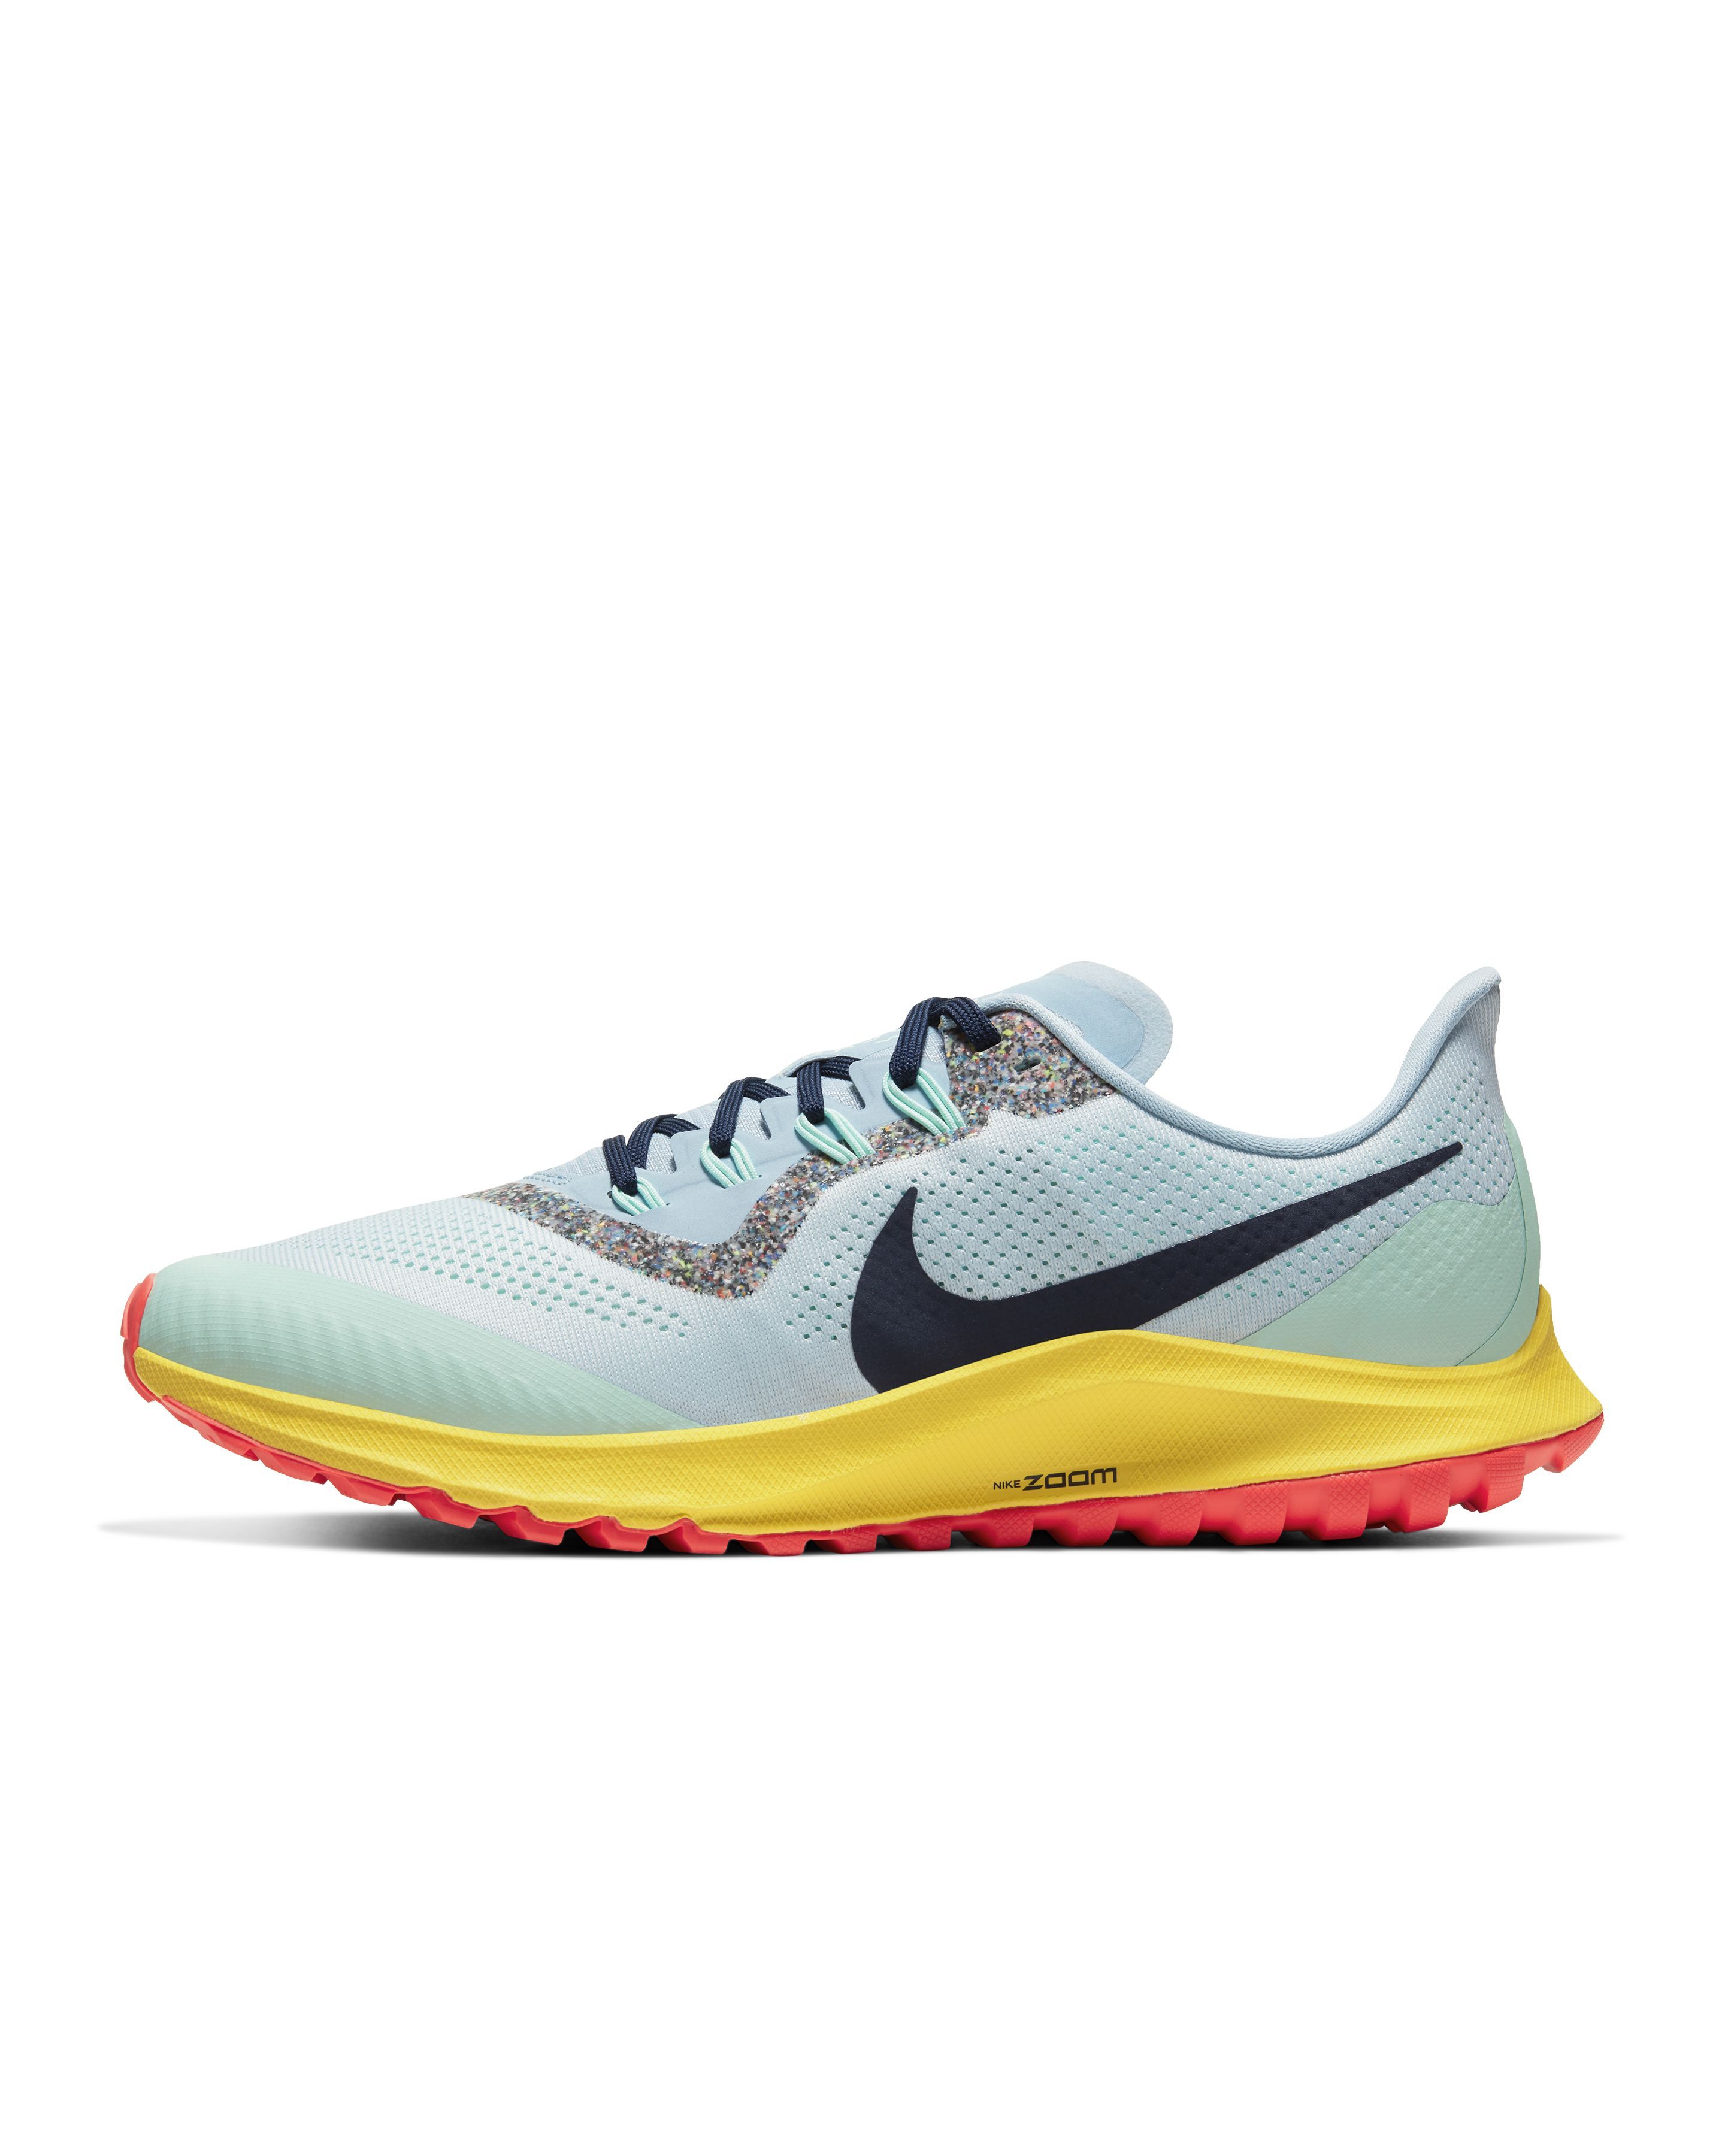 The best Nike running shoes 2020